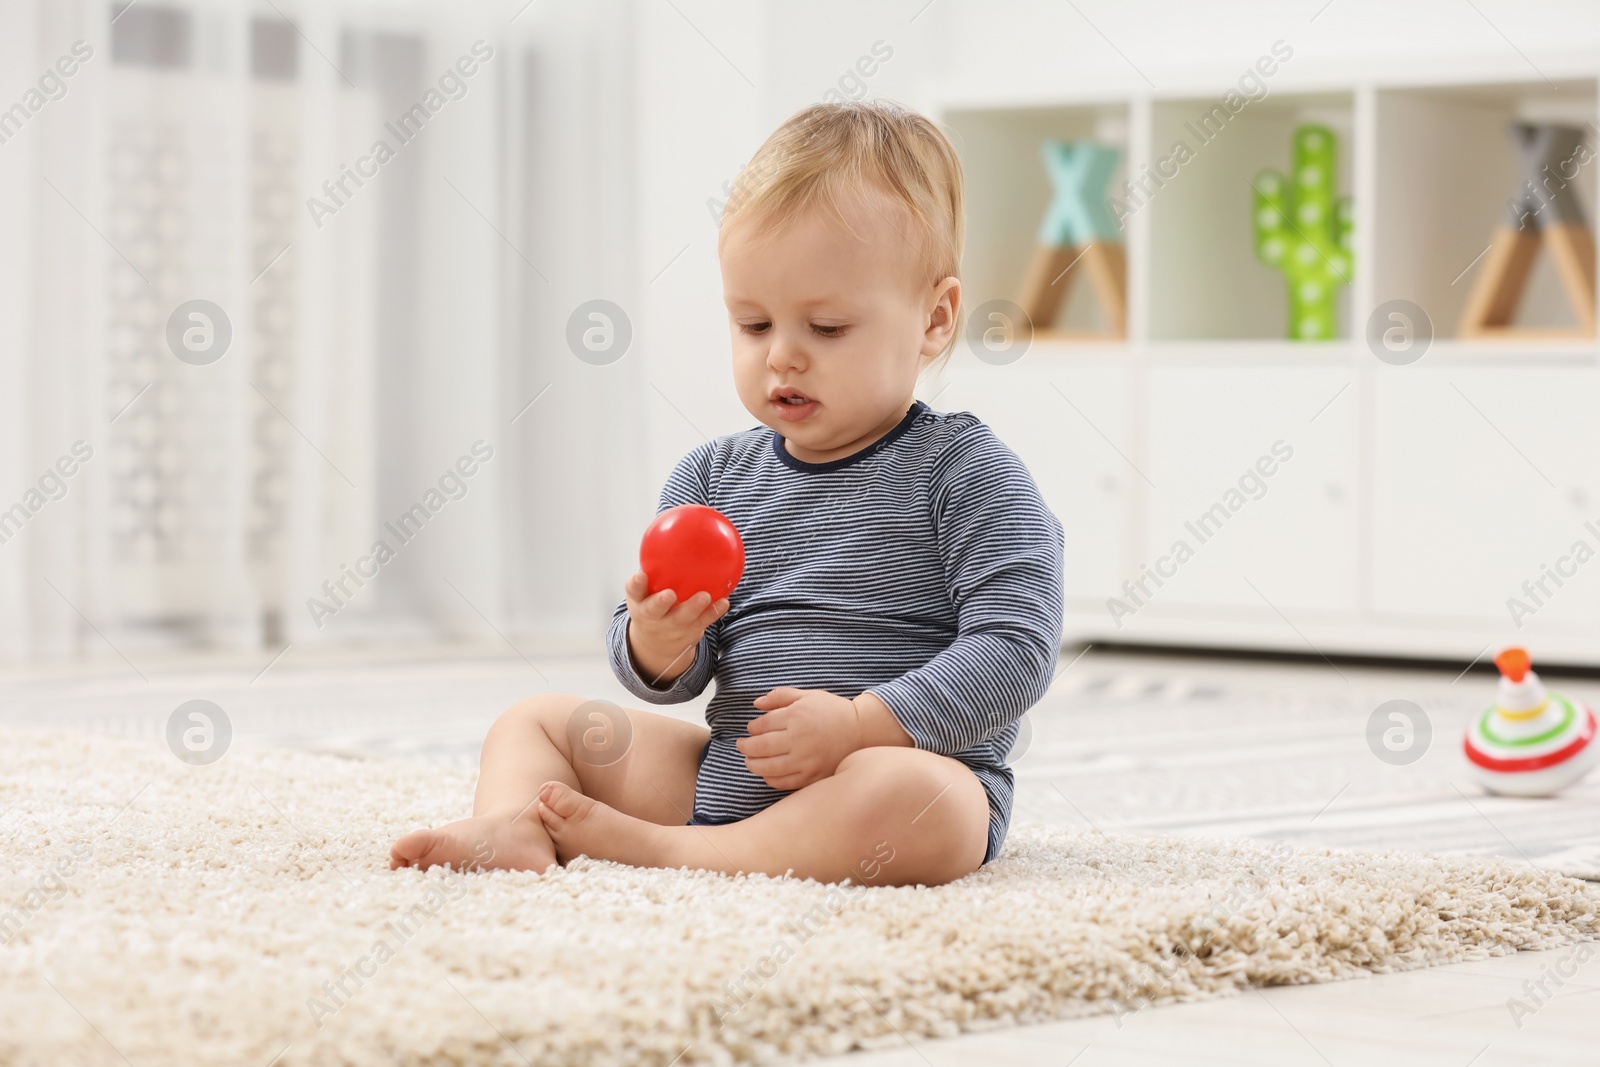 Photo of Children toys. Cute little boy playing with red ball on rug at home